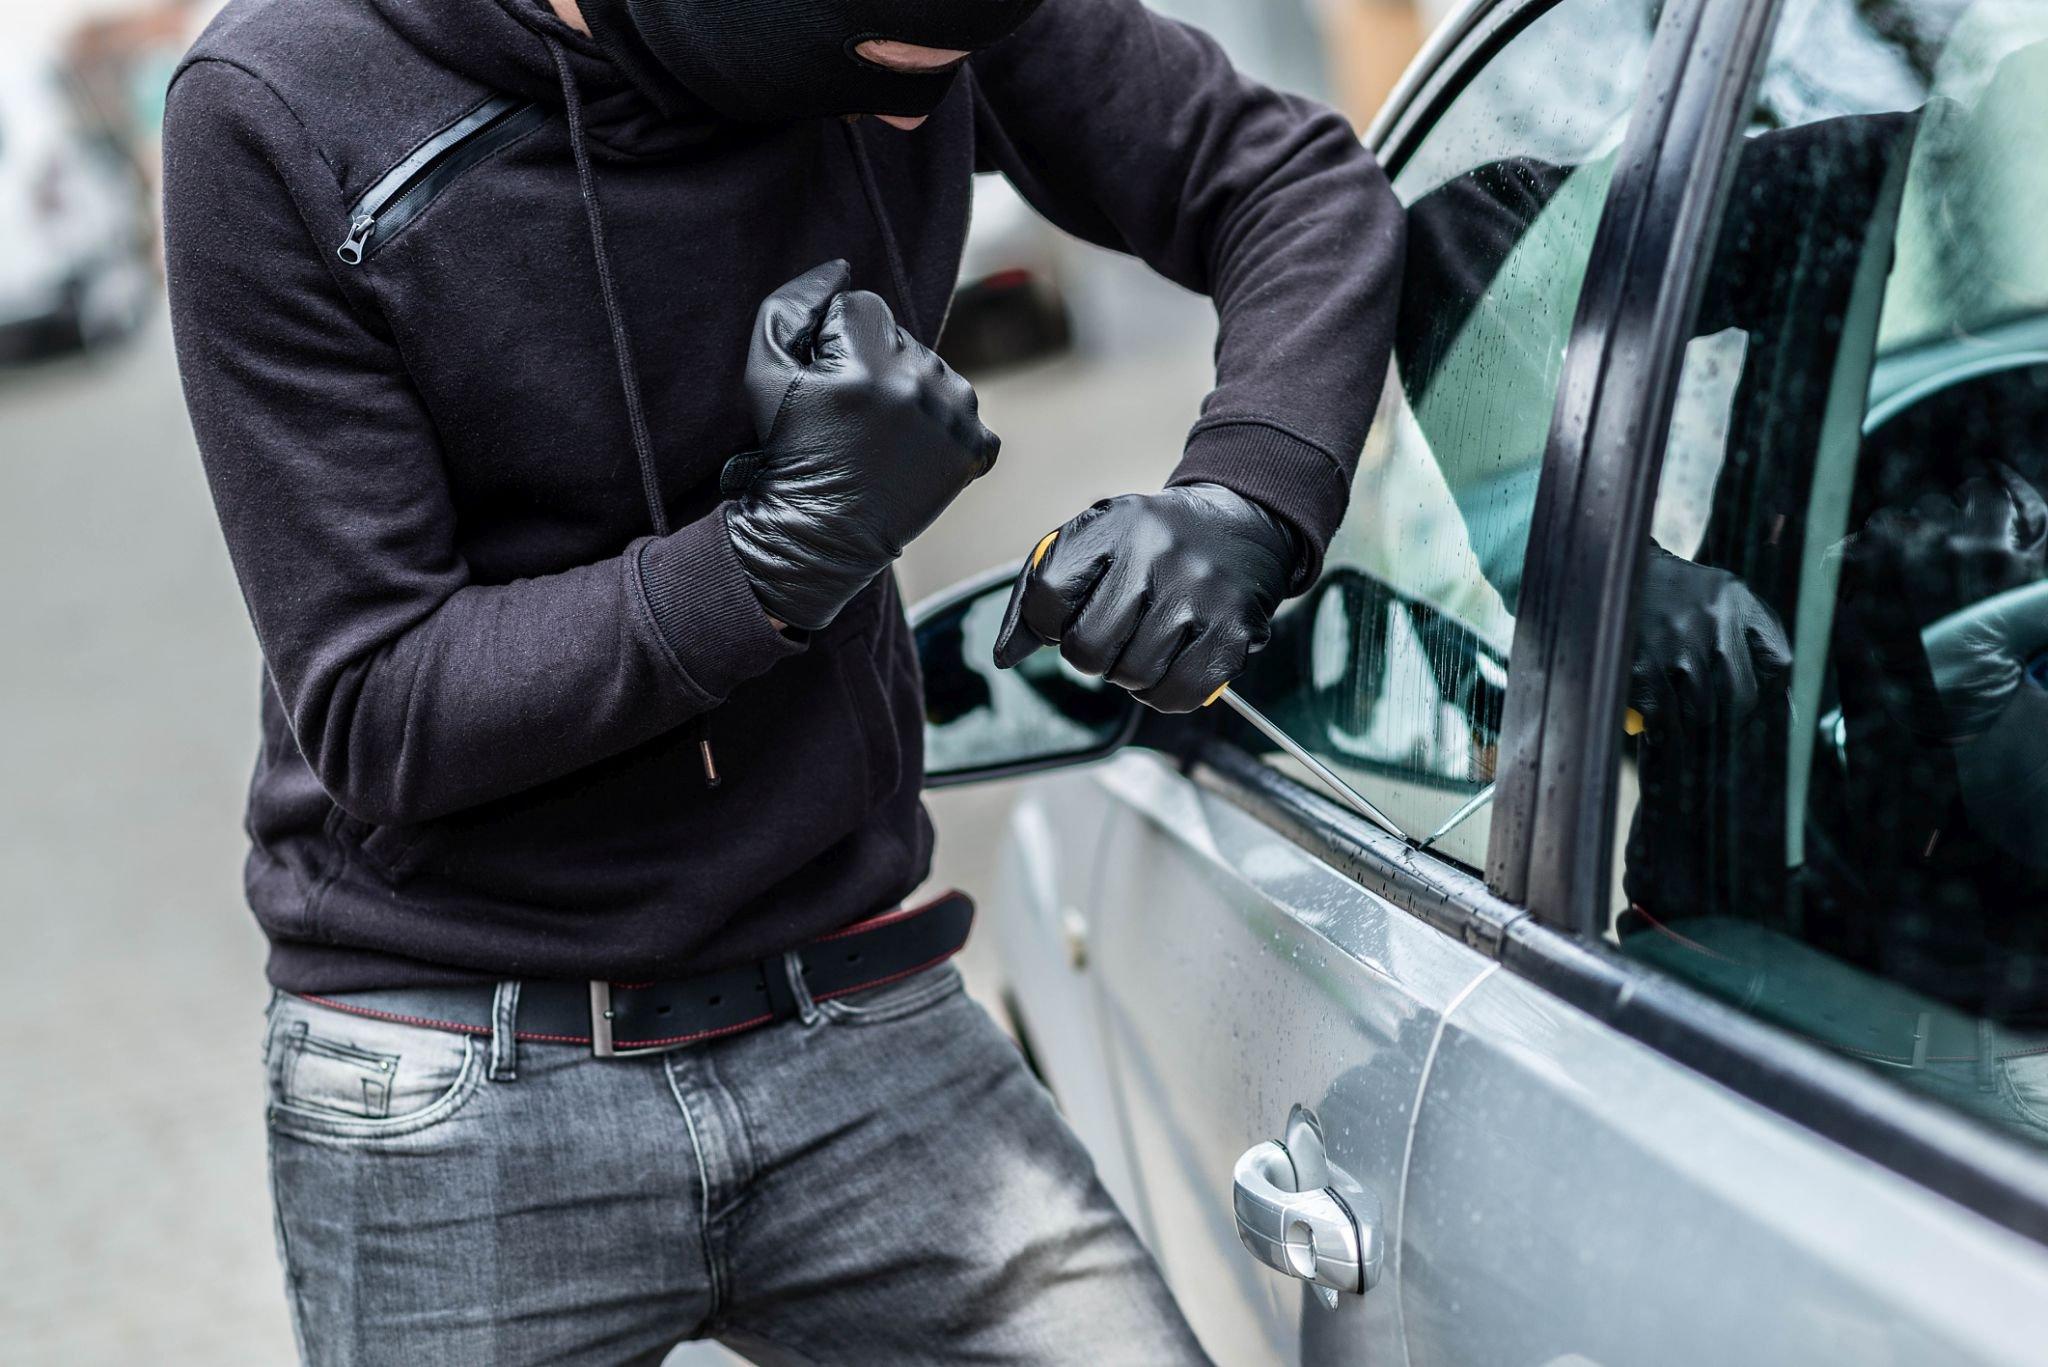 How to Find a Stolen Car Without a Tracker